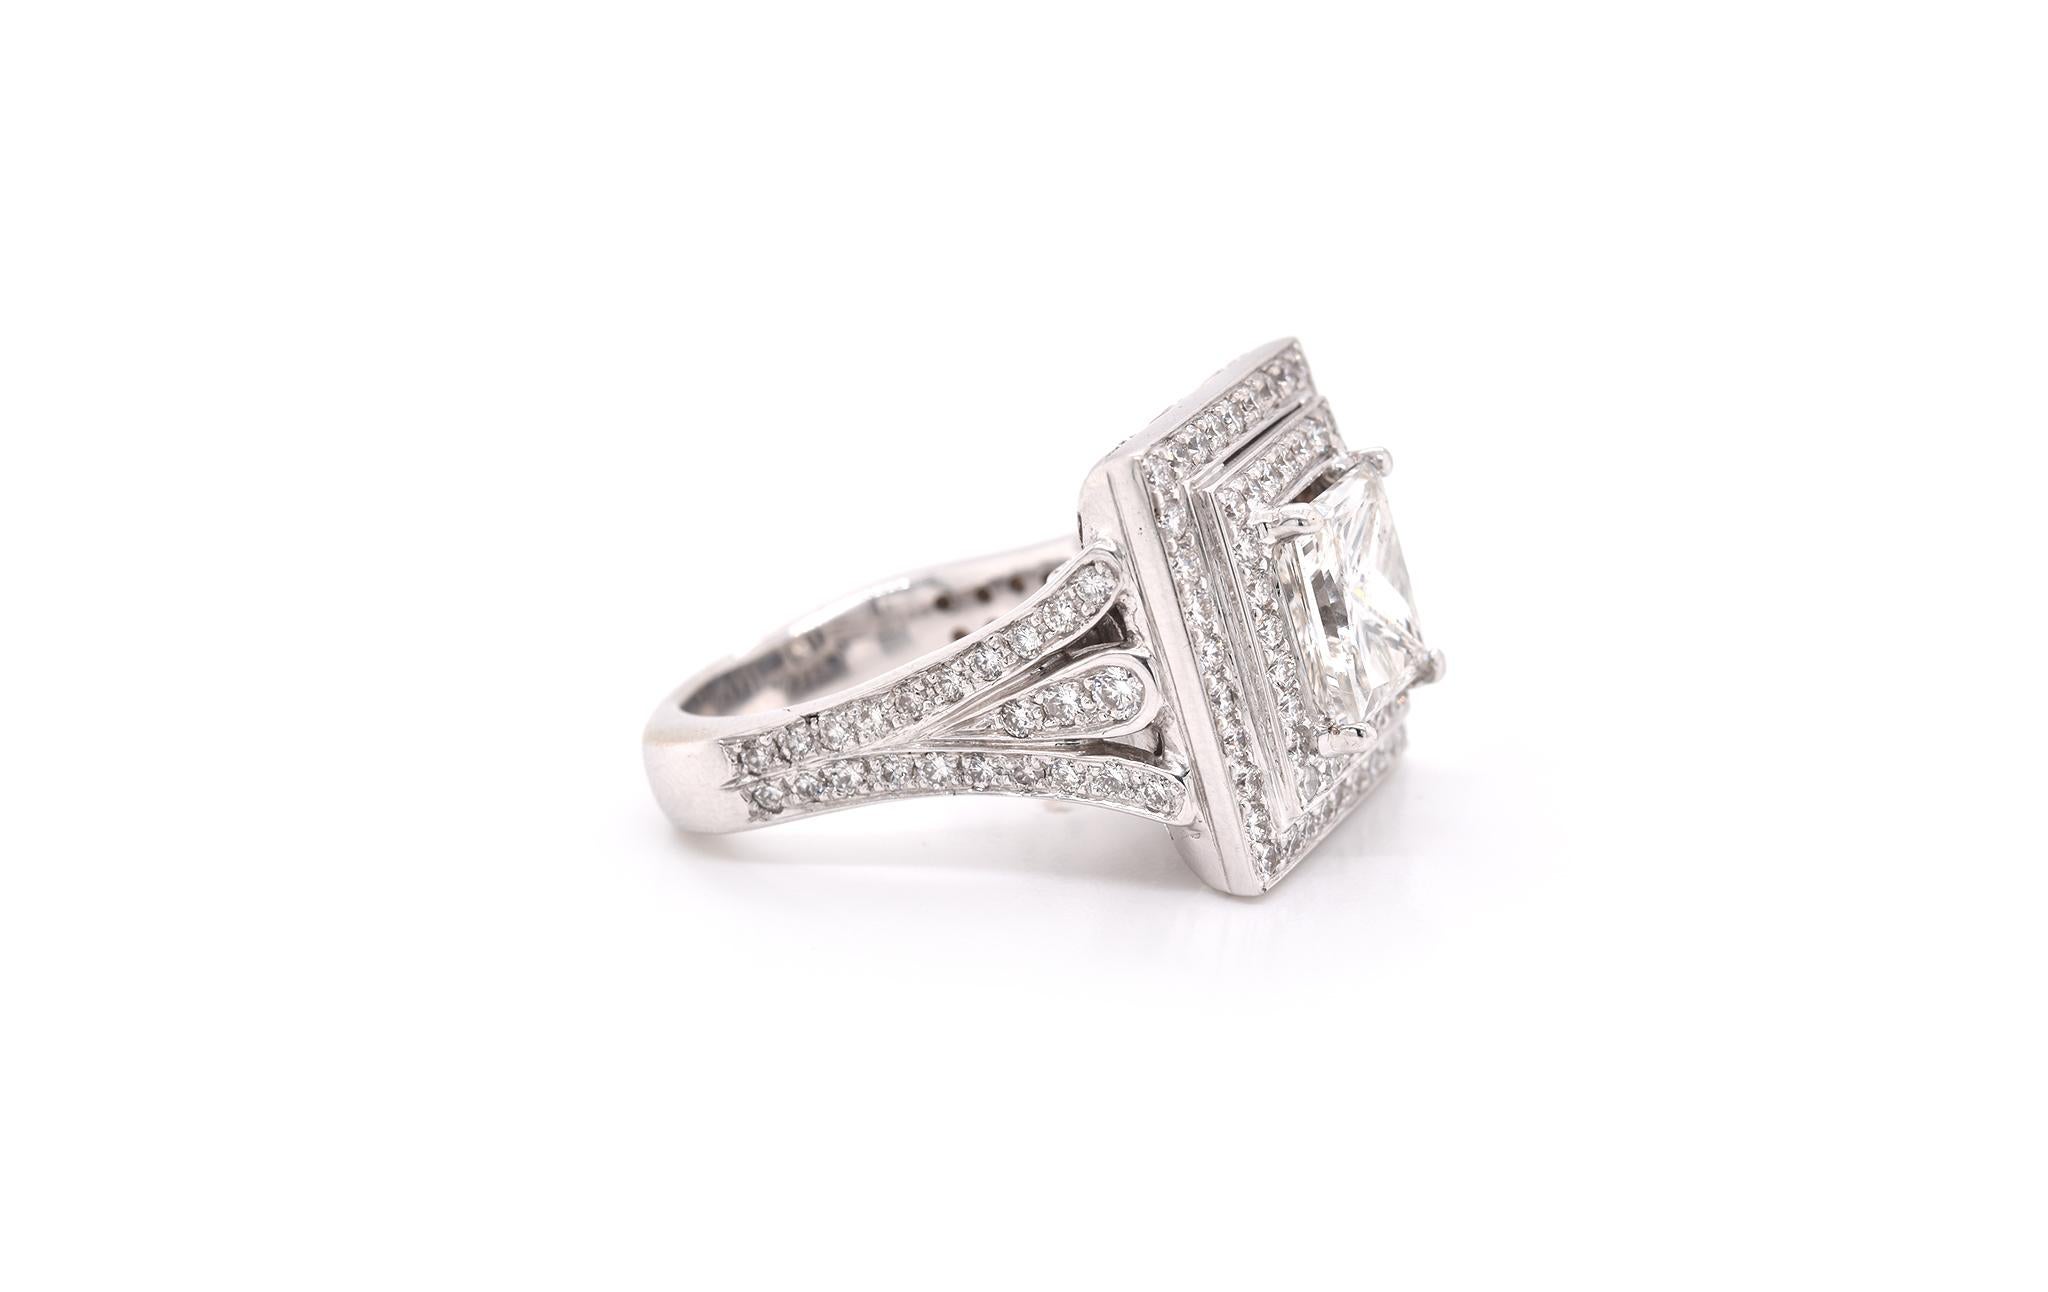 Material: 18k white gold
Center Diamond: 1 princess cut = 4.04cttw
Color: I
Clarity: SI2
Cert: GIA 2203324756
Accent Diamonds: 108 round brilliant cuts = 1.65cttw
Color: G
Clarity: VS
Ring Size: 7 ¼ (please allow up to 2 additional business days for